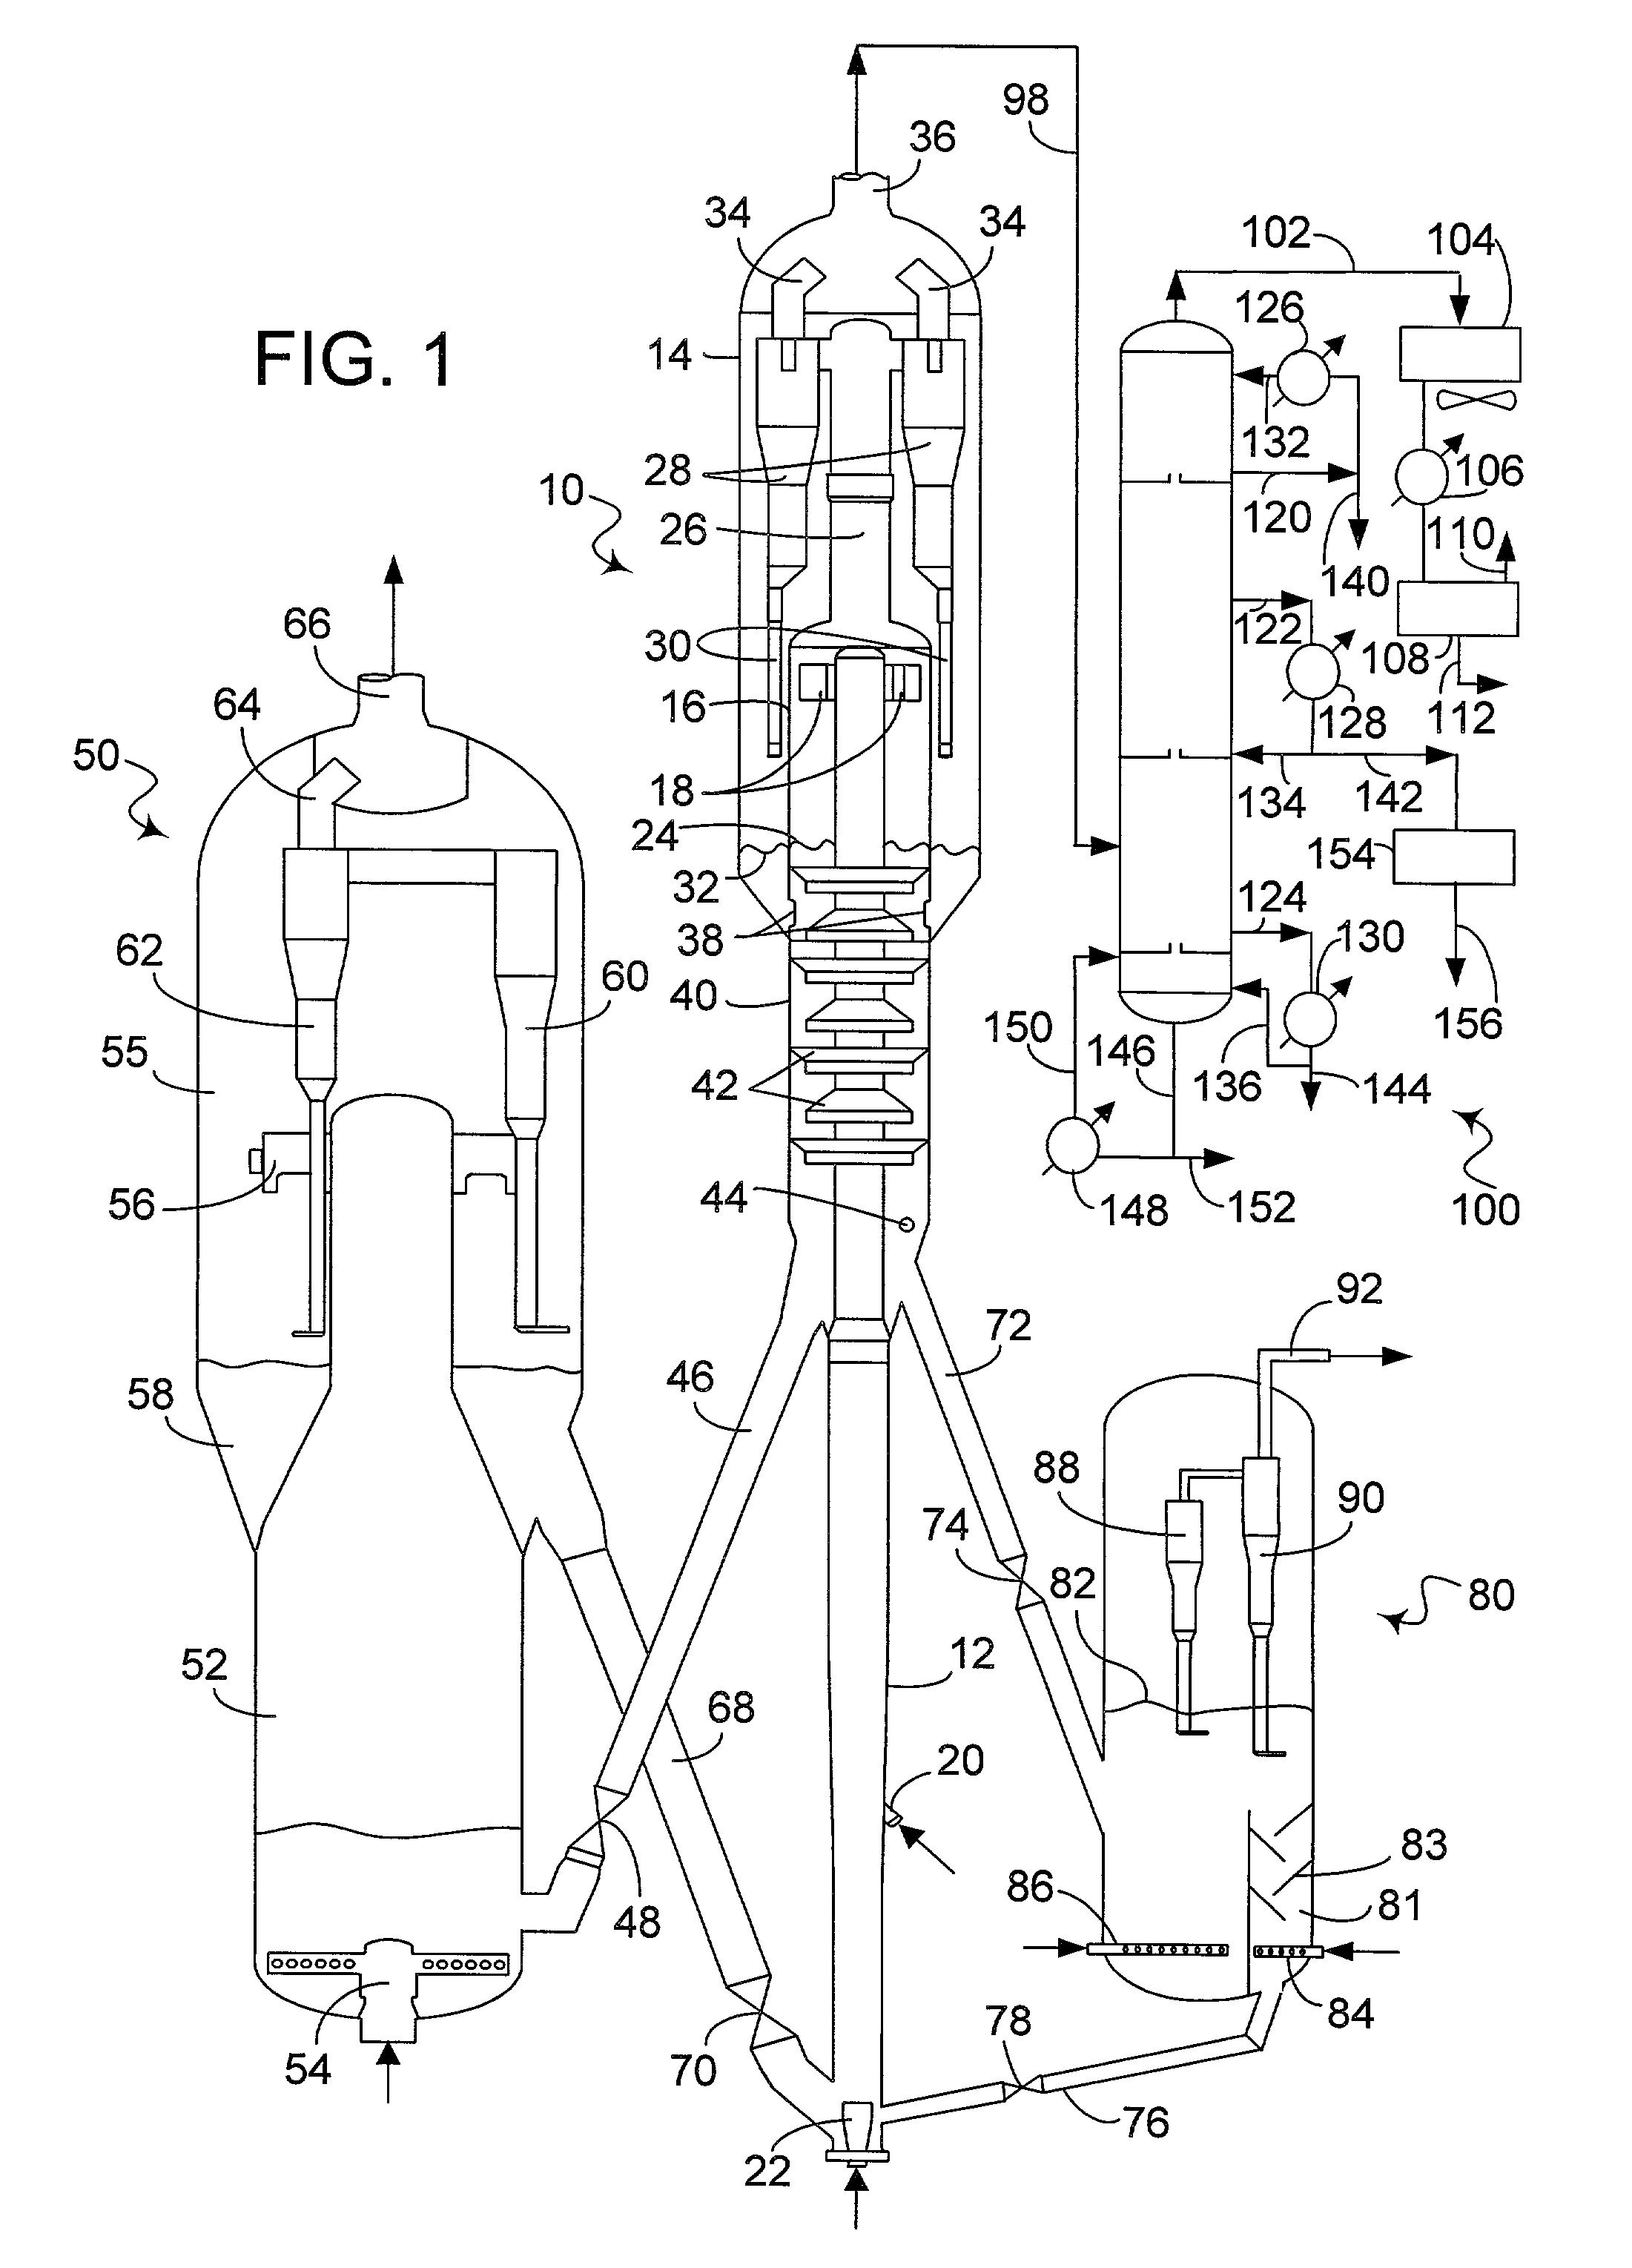 Process for upgrading fcc product with additional reactor